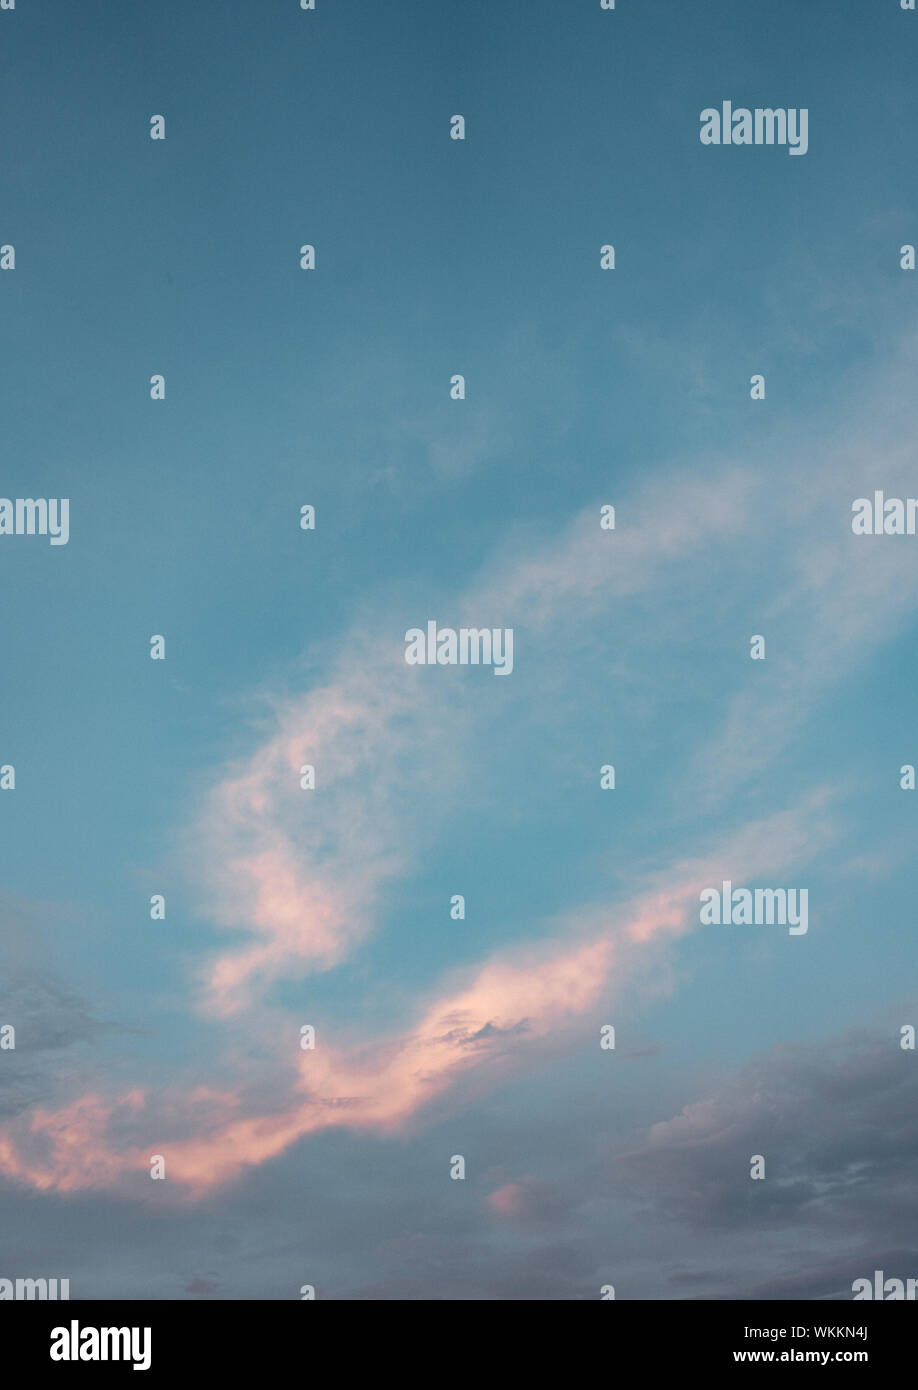 Teal blue sky overlay background with clouds Stock Photo